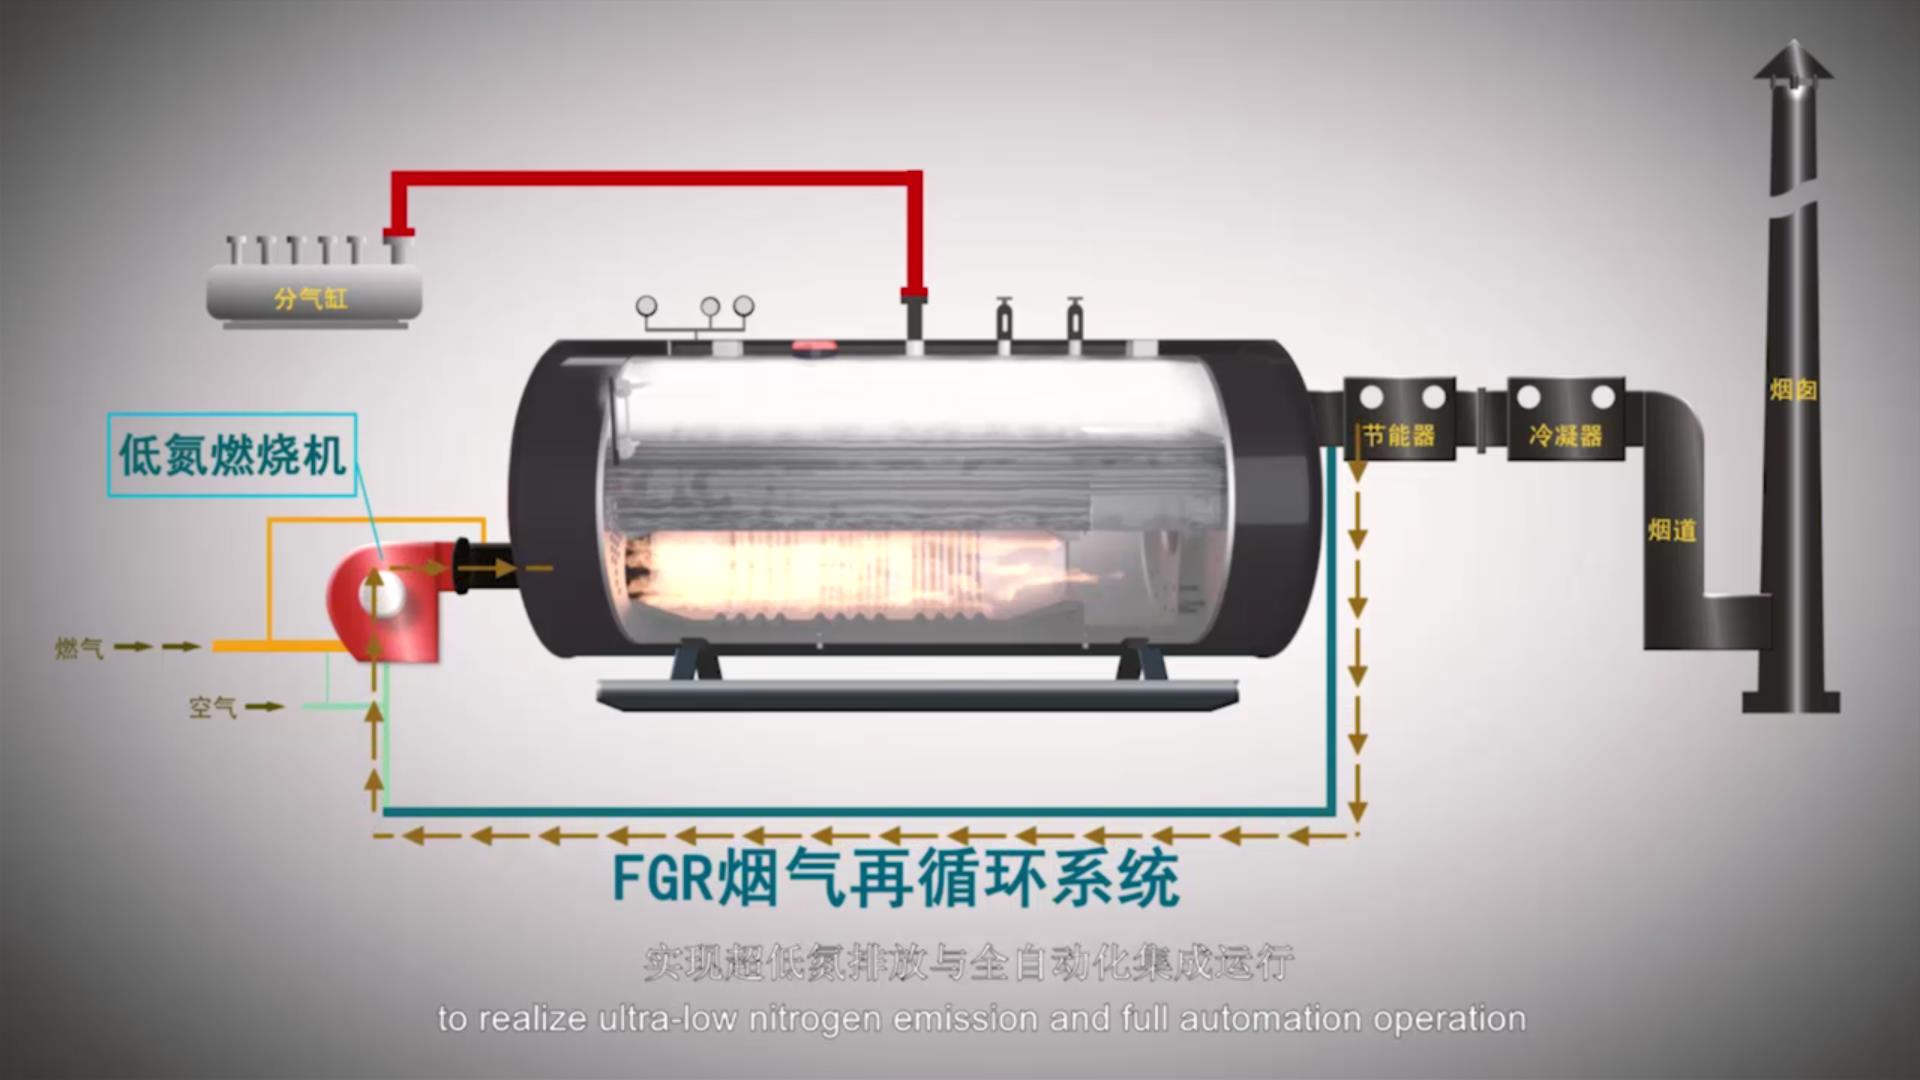 Oil and gas fired boiler